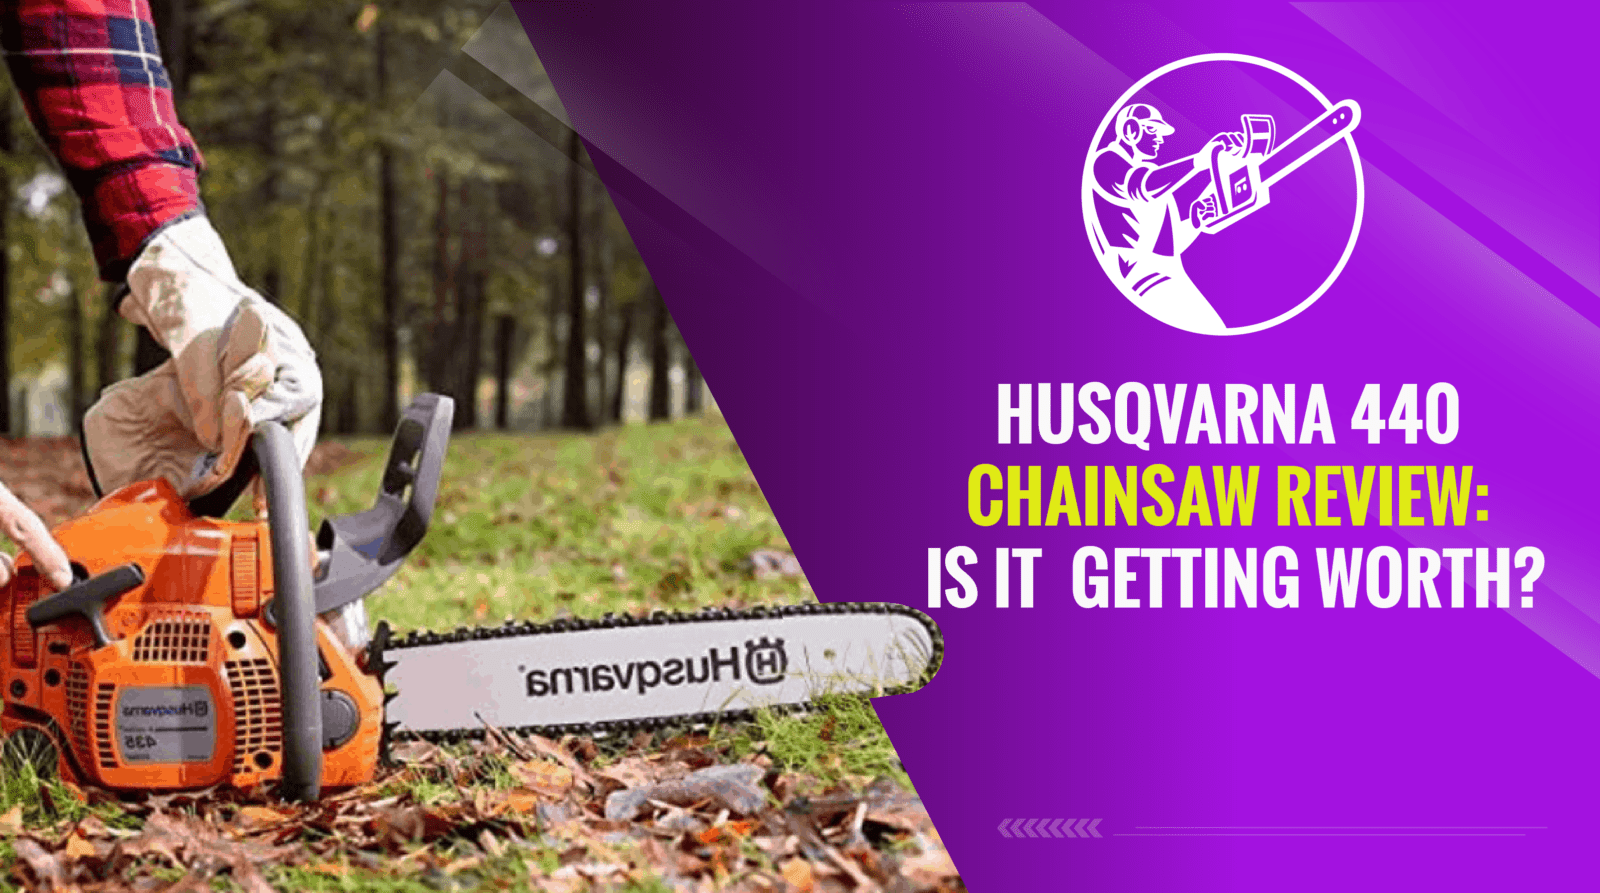 Husqvarna 440 Chainsaw Review Is It Getting Worth